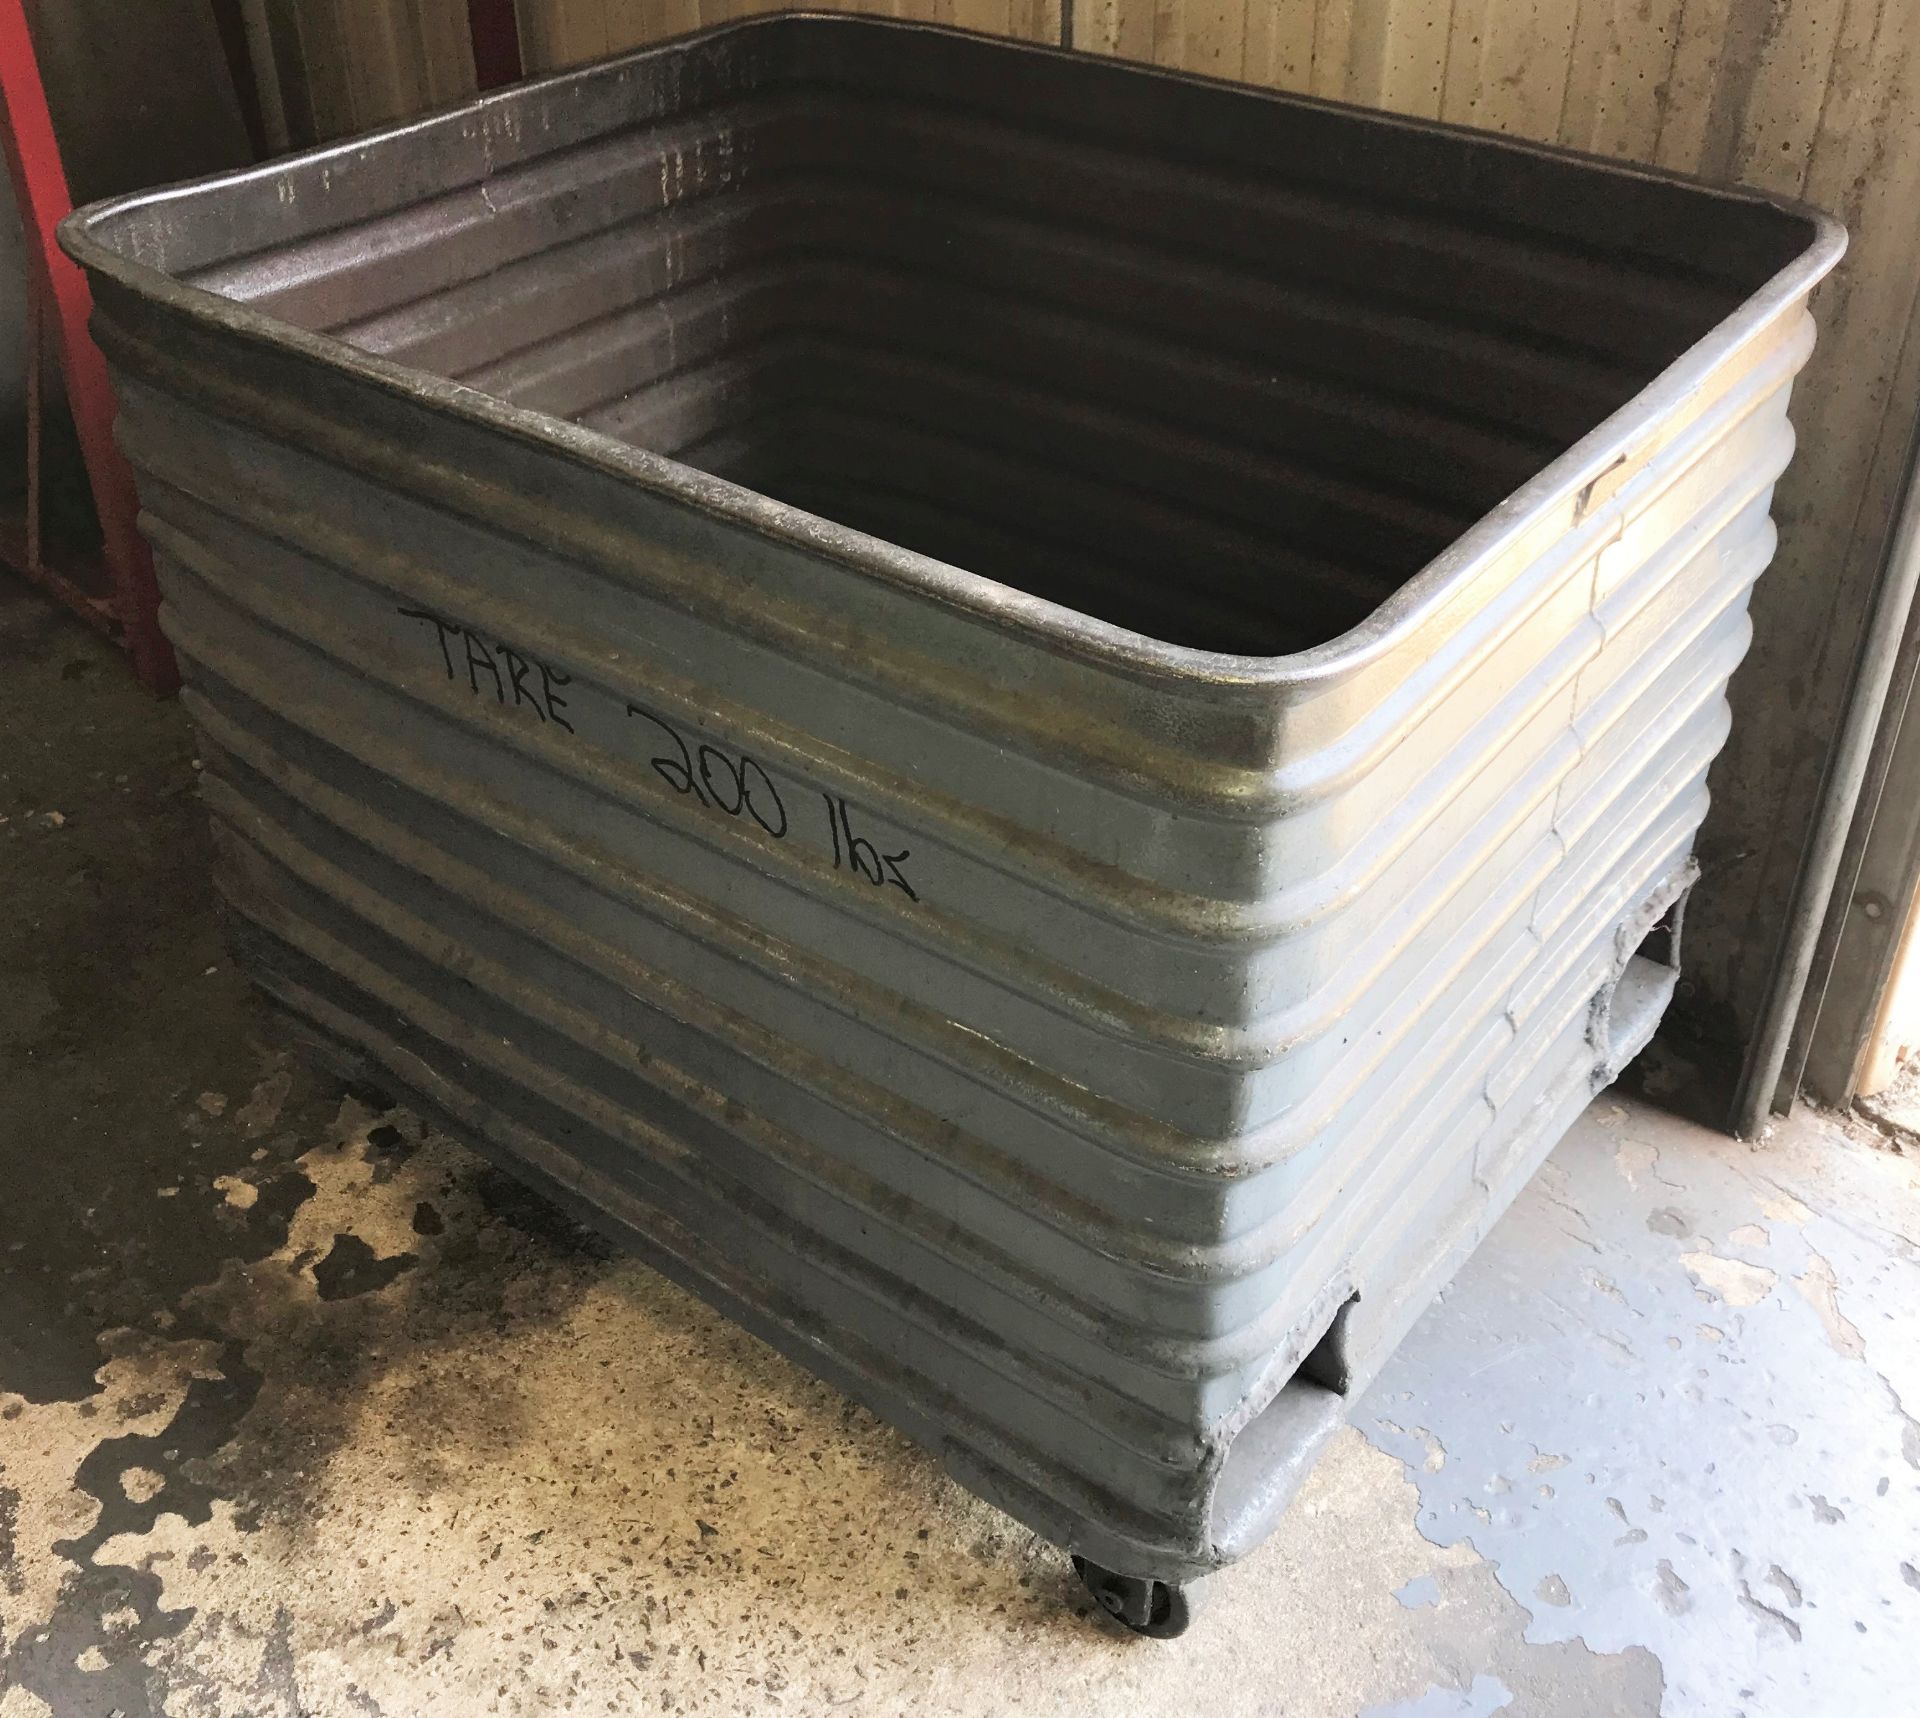 30"W x 40"L x 40"H Corrugated Steel Container